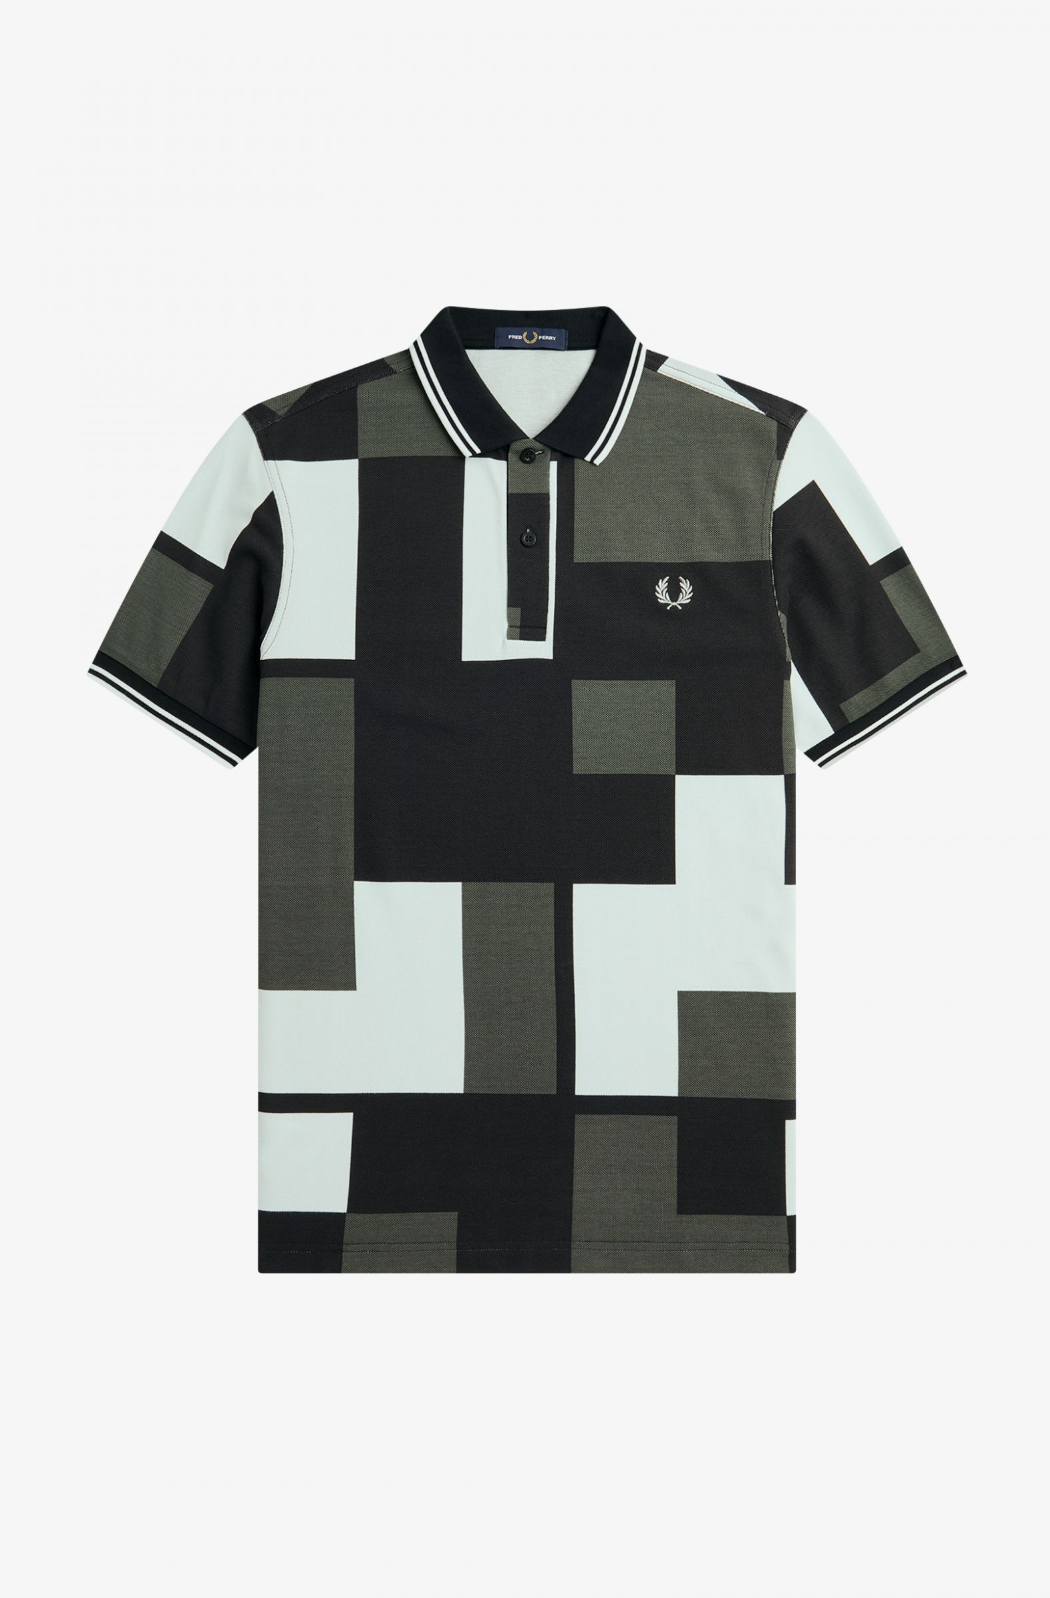 Pixel Print Fred Perry Shirt